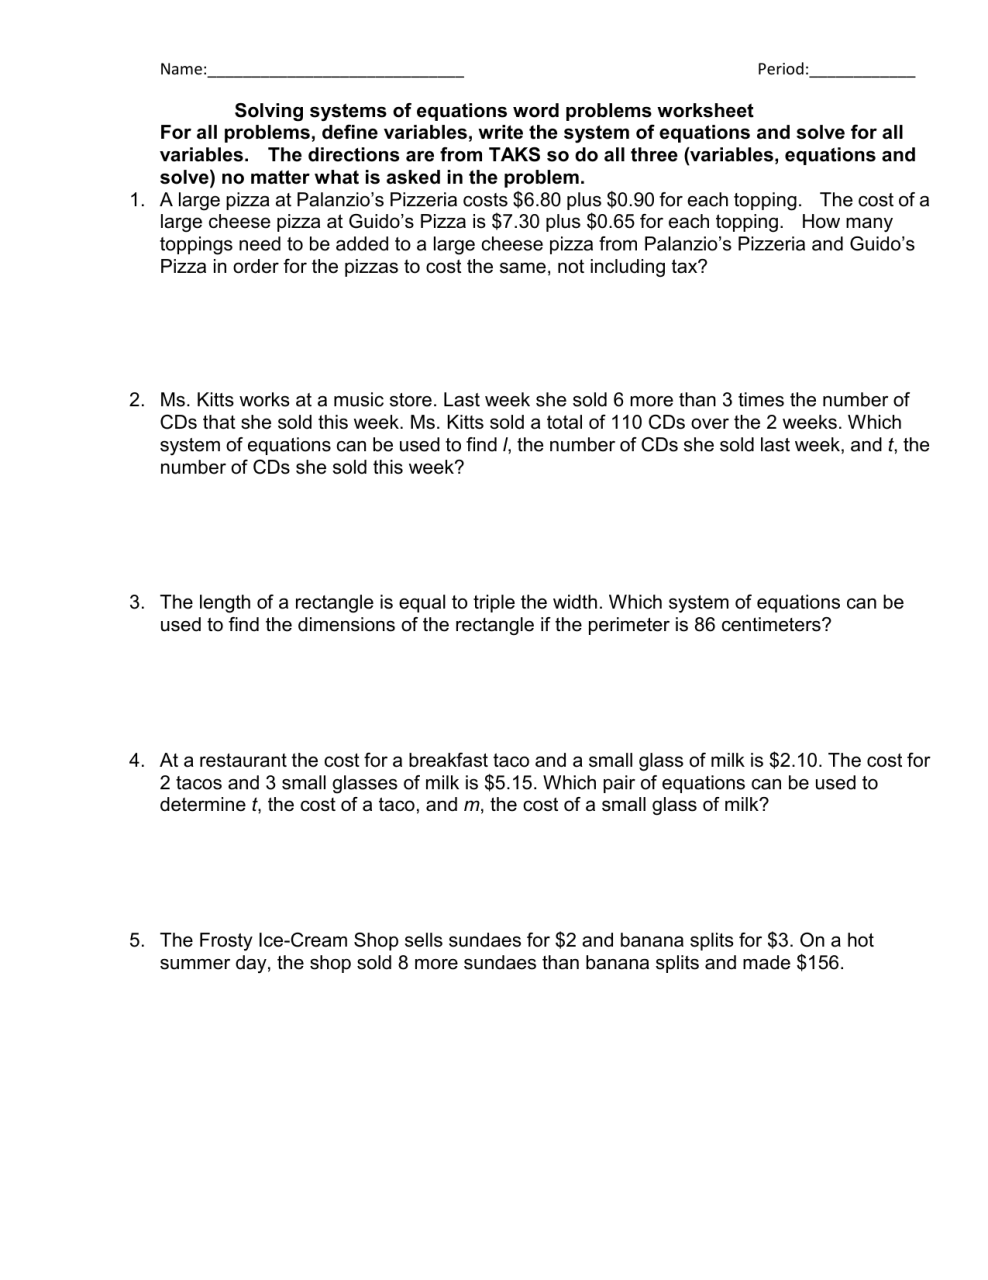 Systems Of Equations Word Problems Worksheet Algebra 2